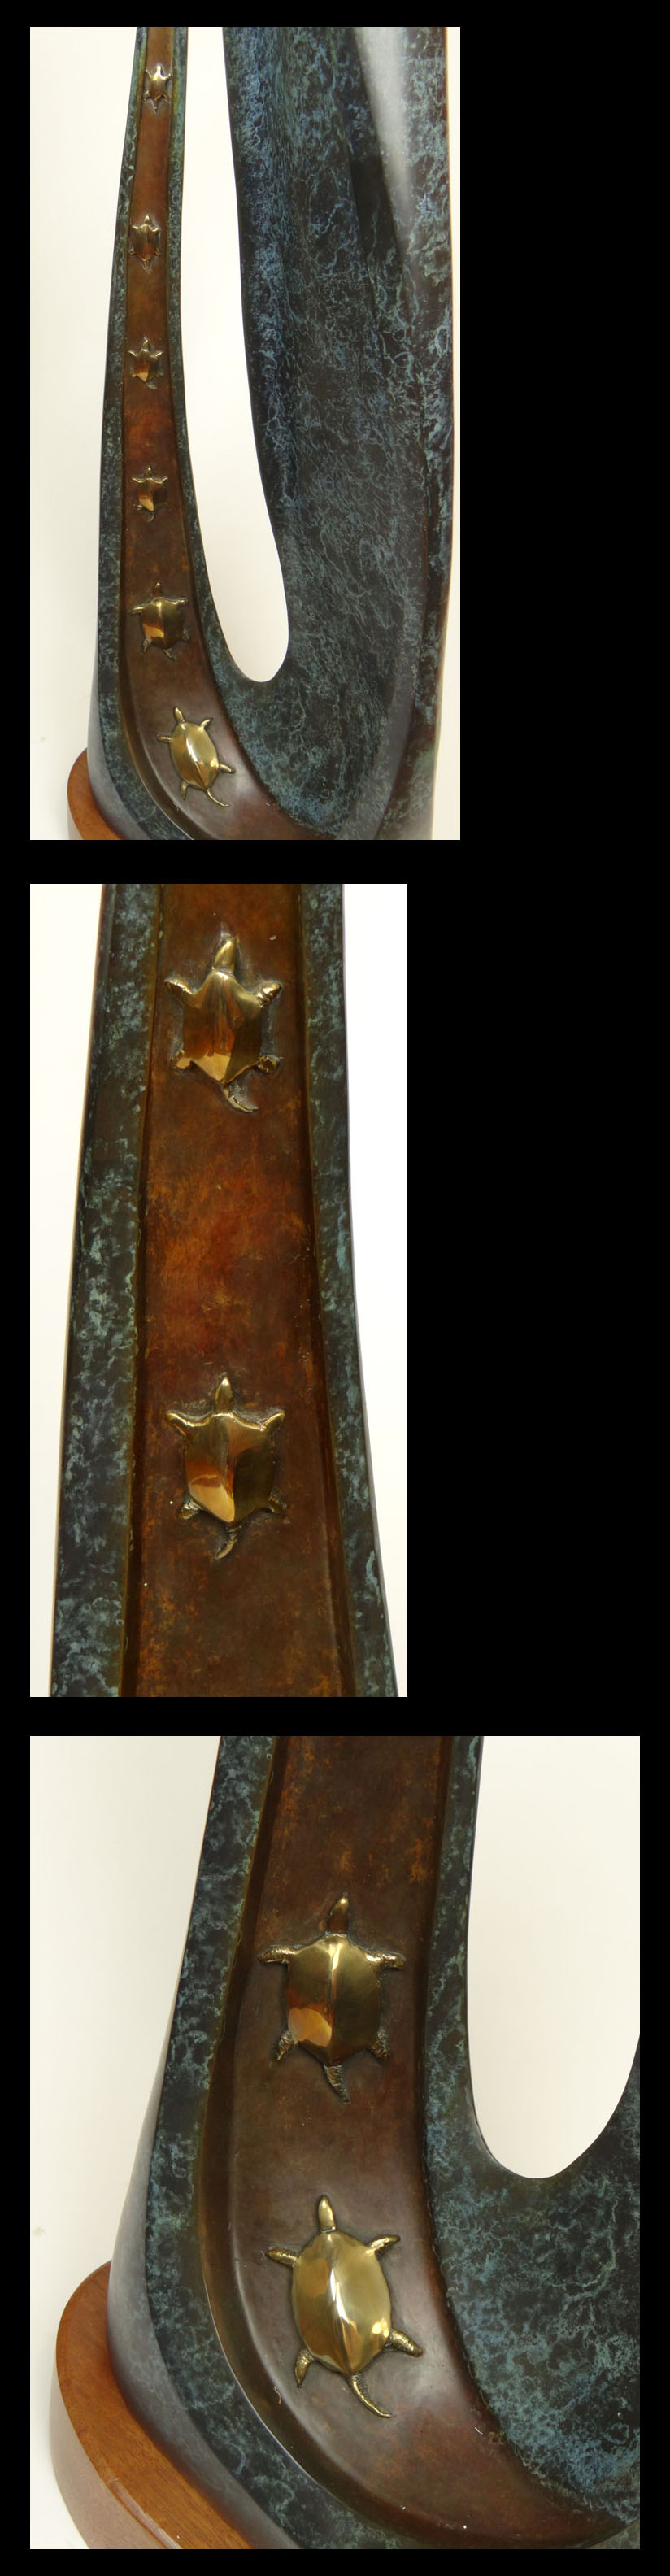 Bruce LaFountain, American (1961 - ) Bronze on Wood Base. "Women With Turtles" Signed B. - Image 7 of 11